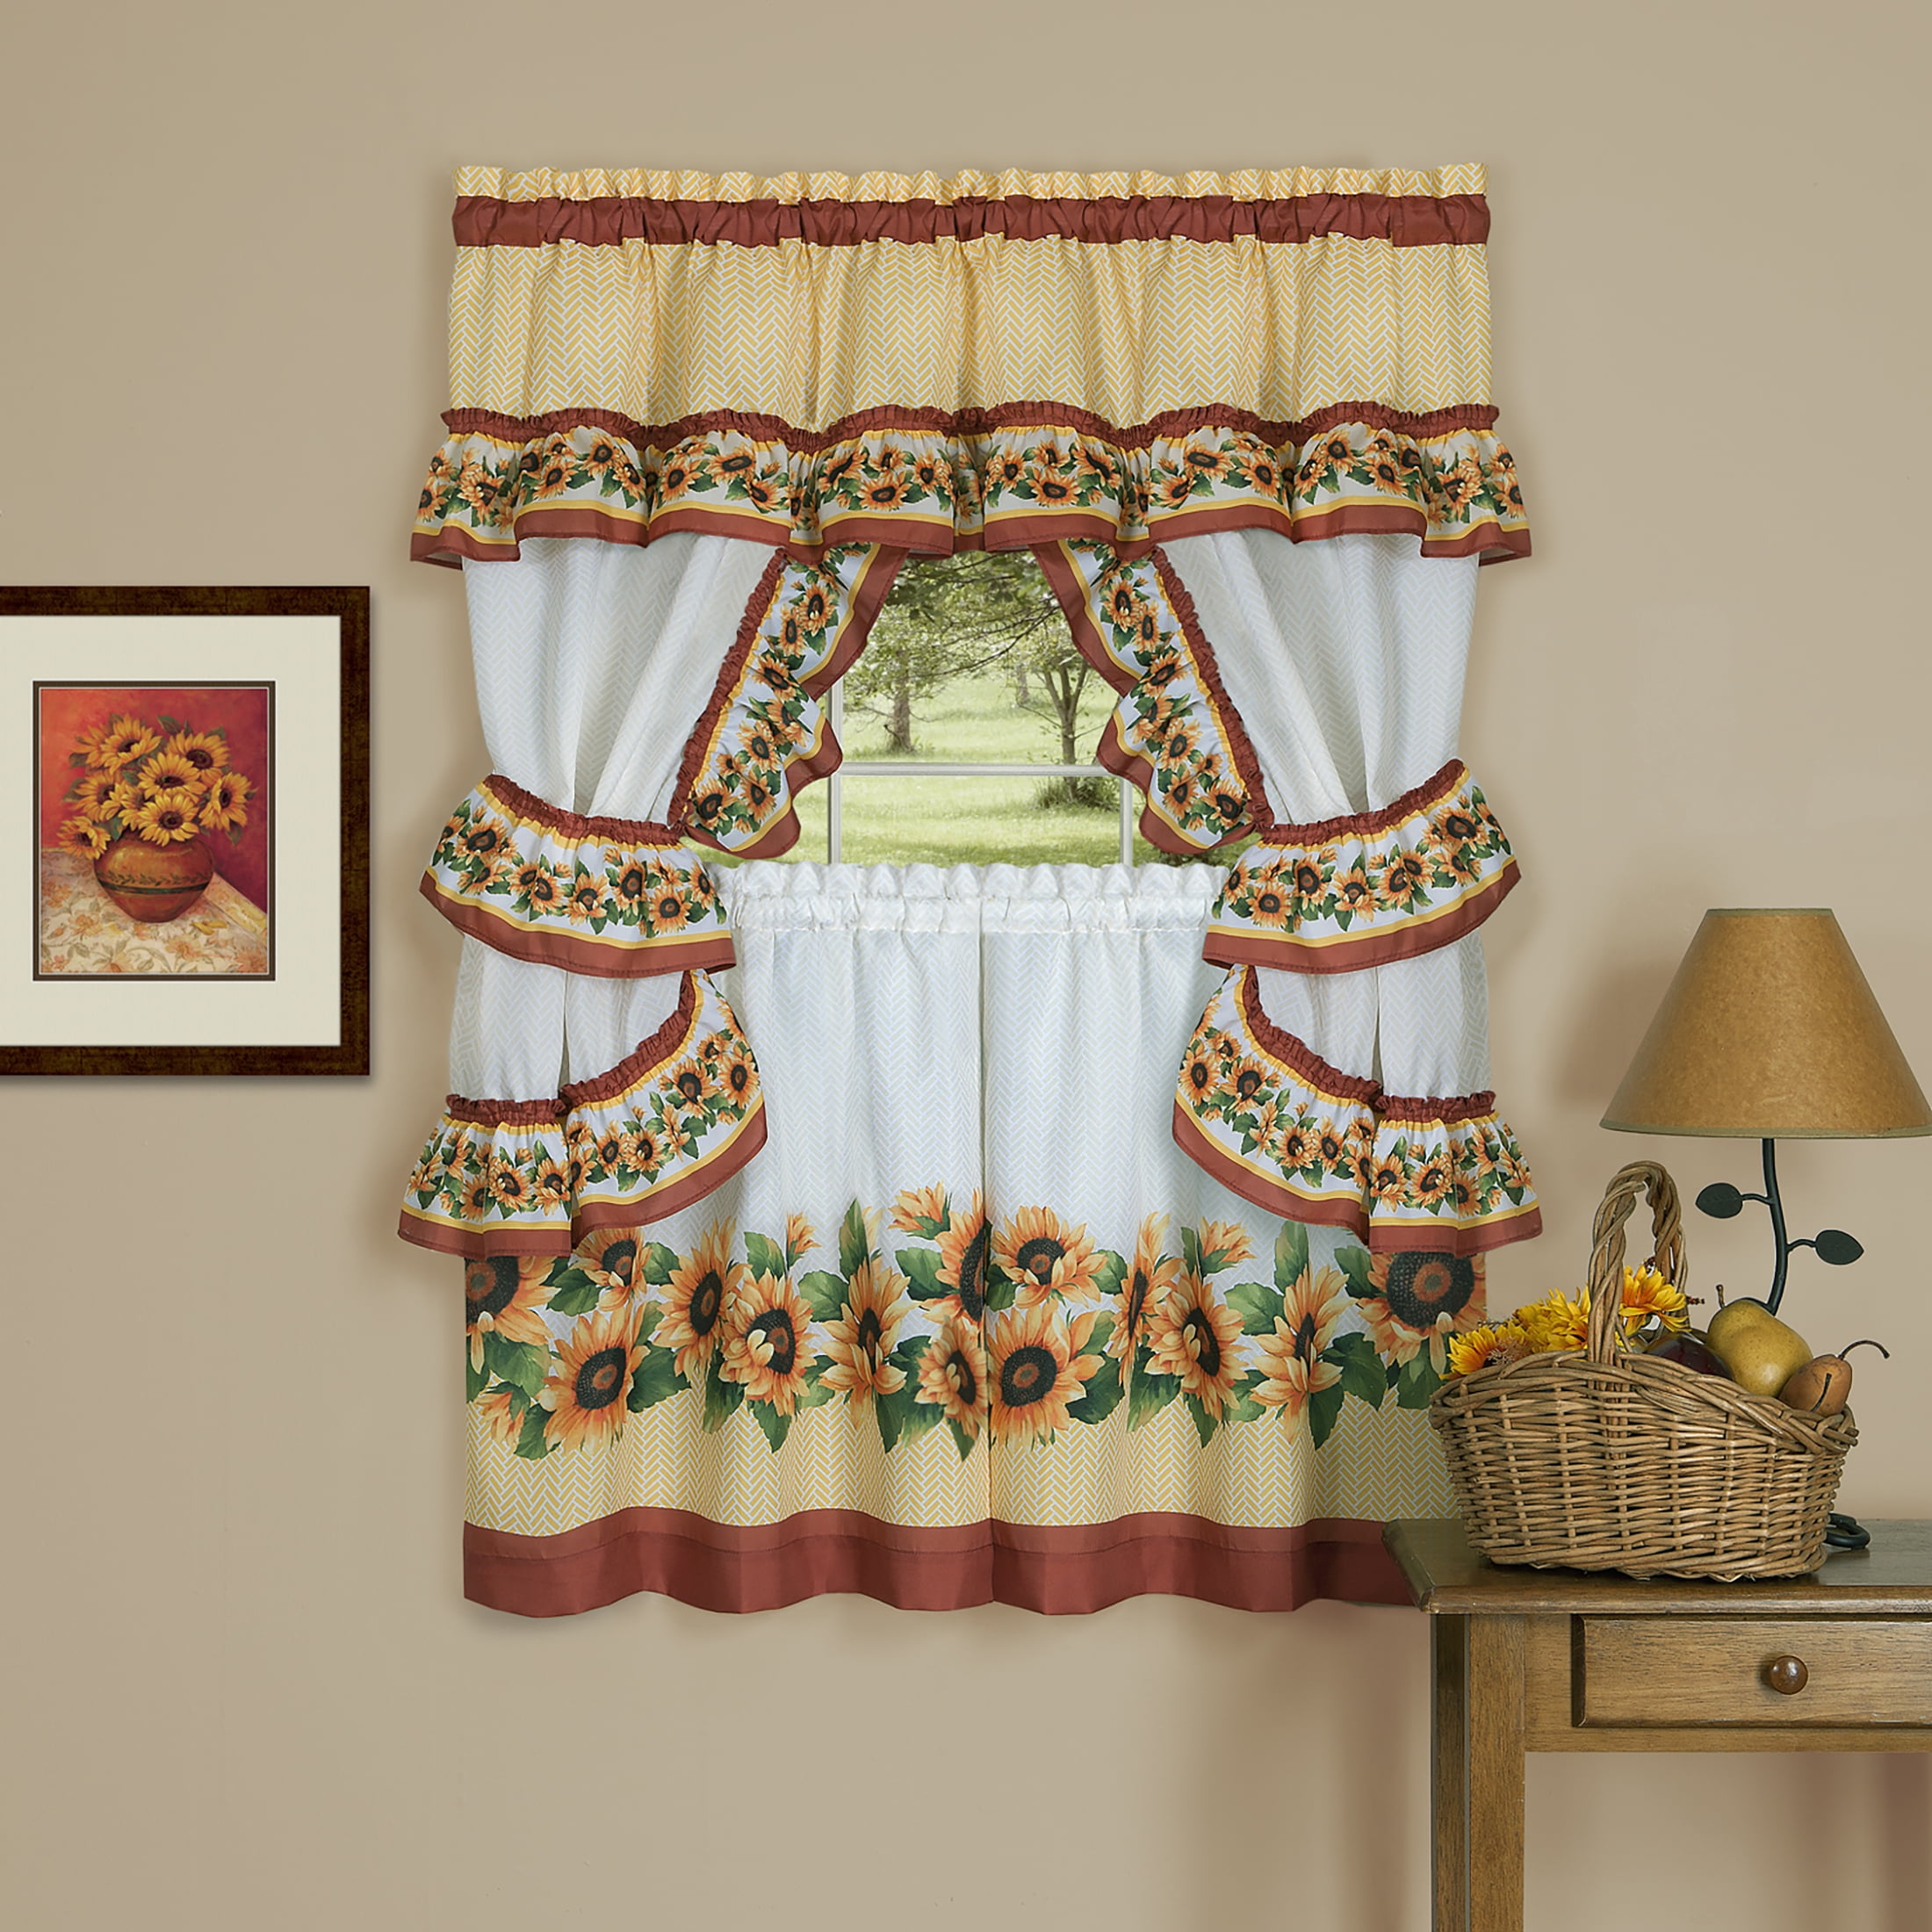 Cafe Curtains Window Art Mural COTTAGE GARDEN Scene Set of Tiers Only 44 x 36 